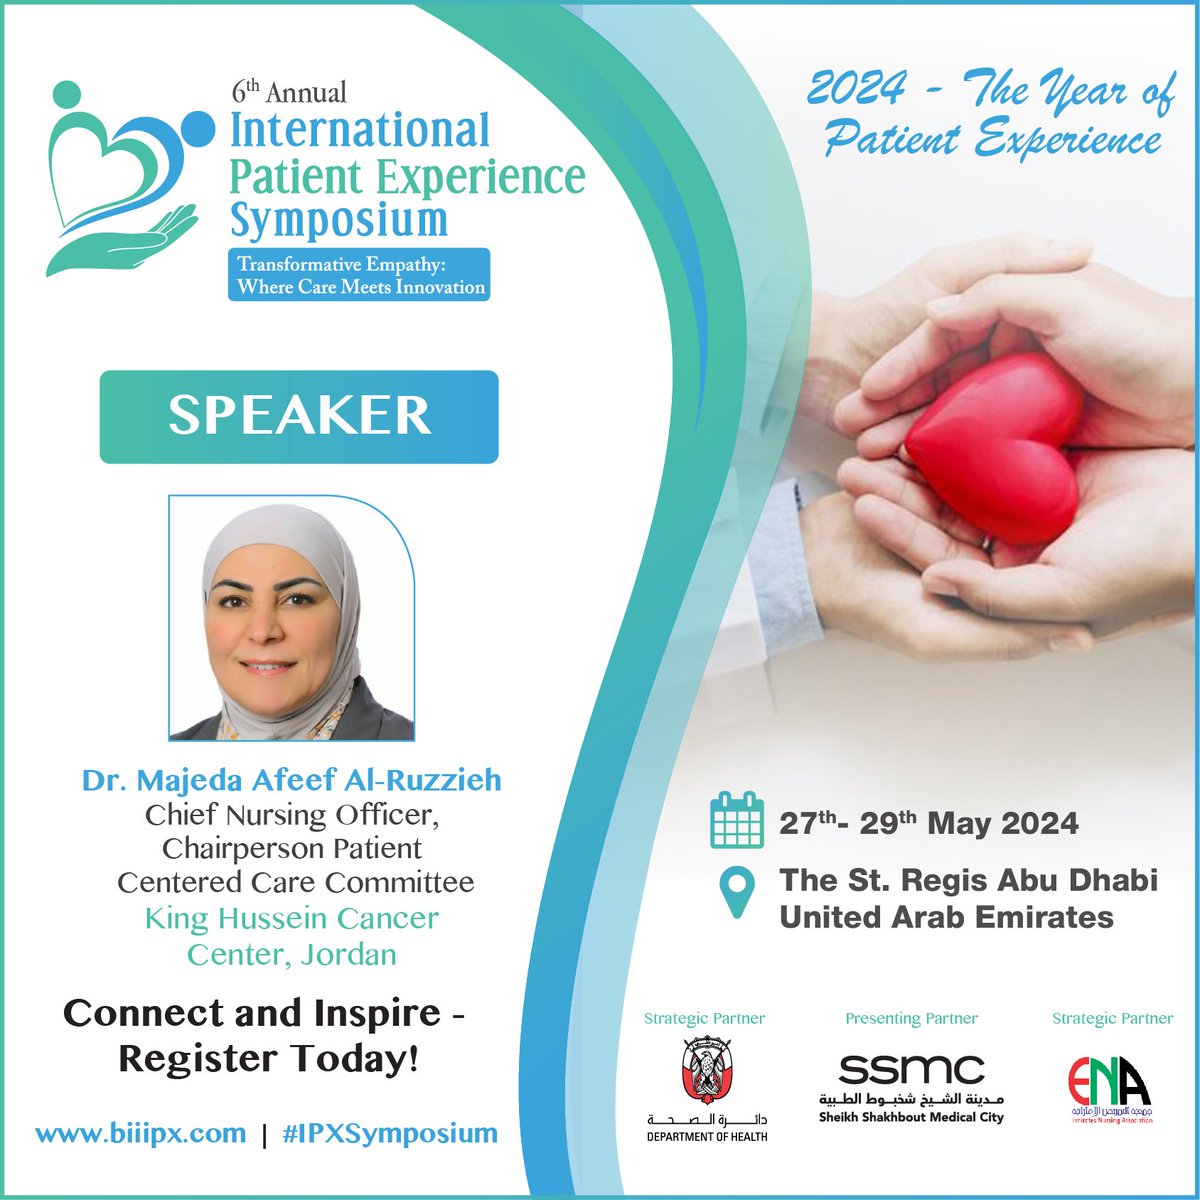 We're honored to have Dr. Majeda Afeef Al-Ruzzieh, Chief #Nursing Officer at King Hussein #Cancer Center, #Jordan, as a distinguished speaker at the 6th Annual International #PatientExperience Symposium!🔗Register Now: biiipx.com/register
#IPXSymposium #HealthcareInnovation